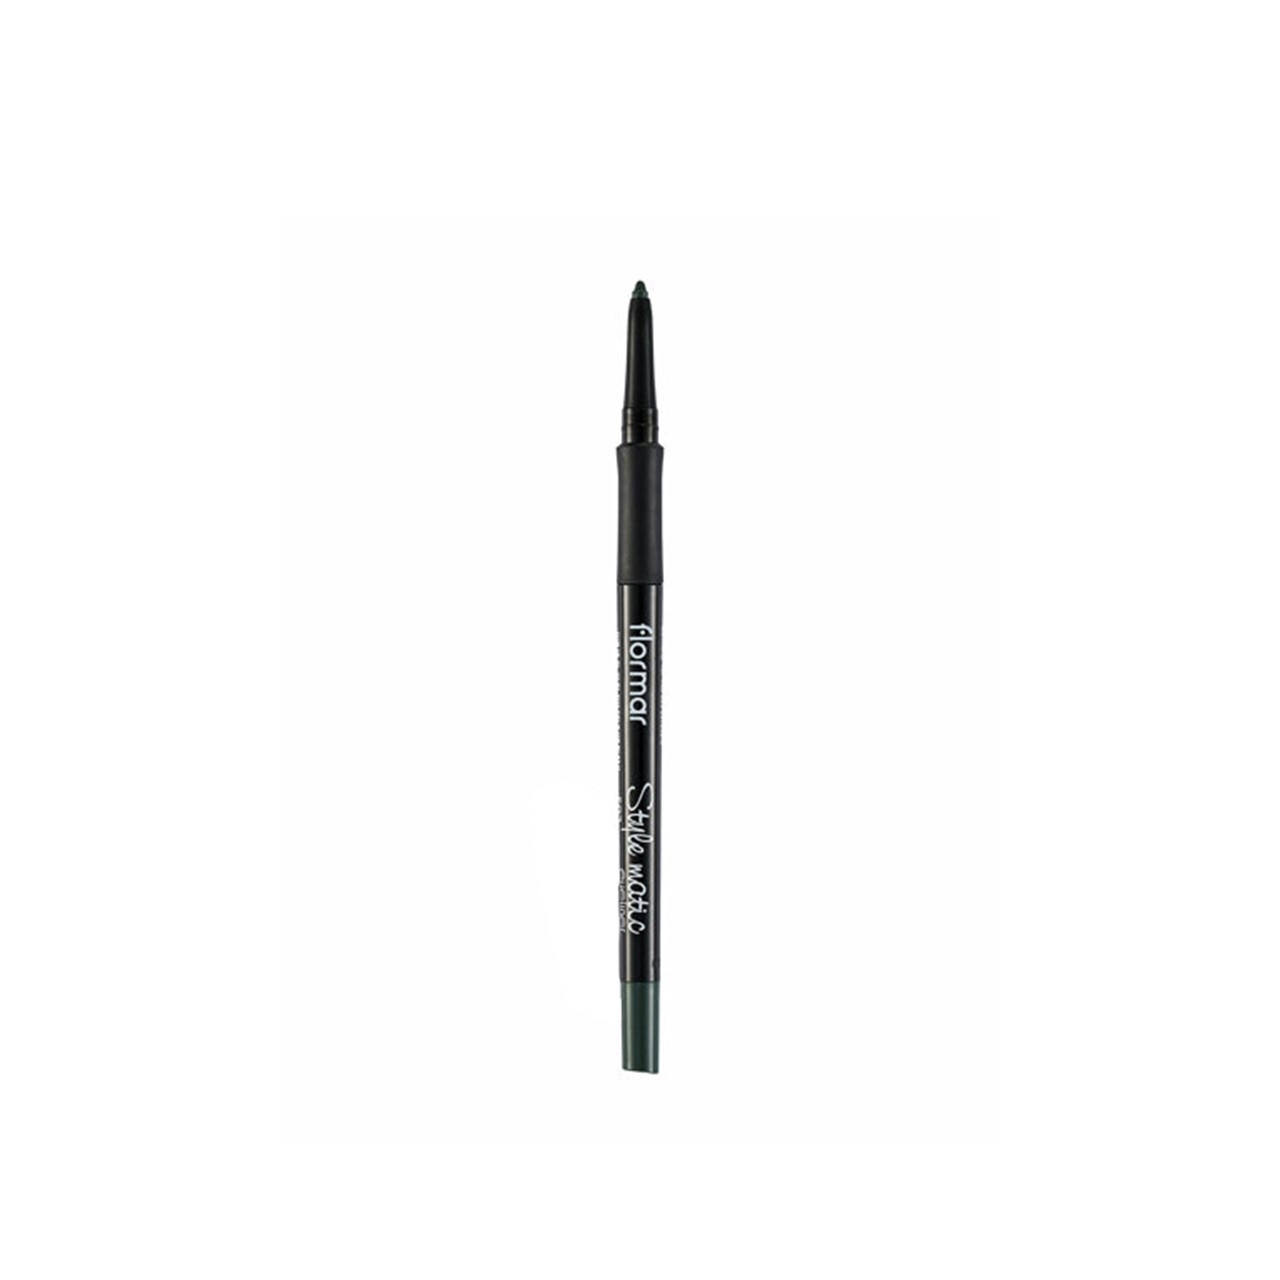 Flormar Stylematic Eyeliner 08 Serious Green 0.35g (0.01oz)